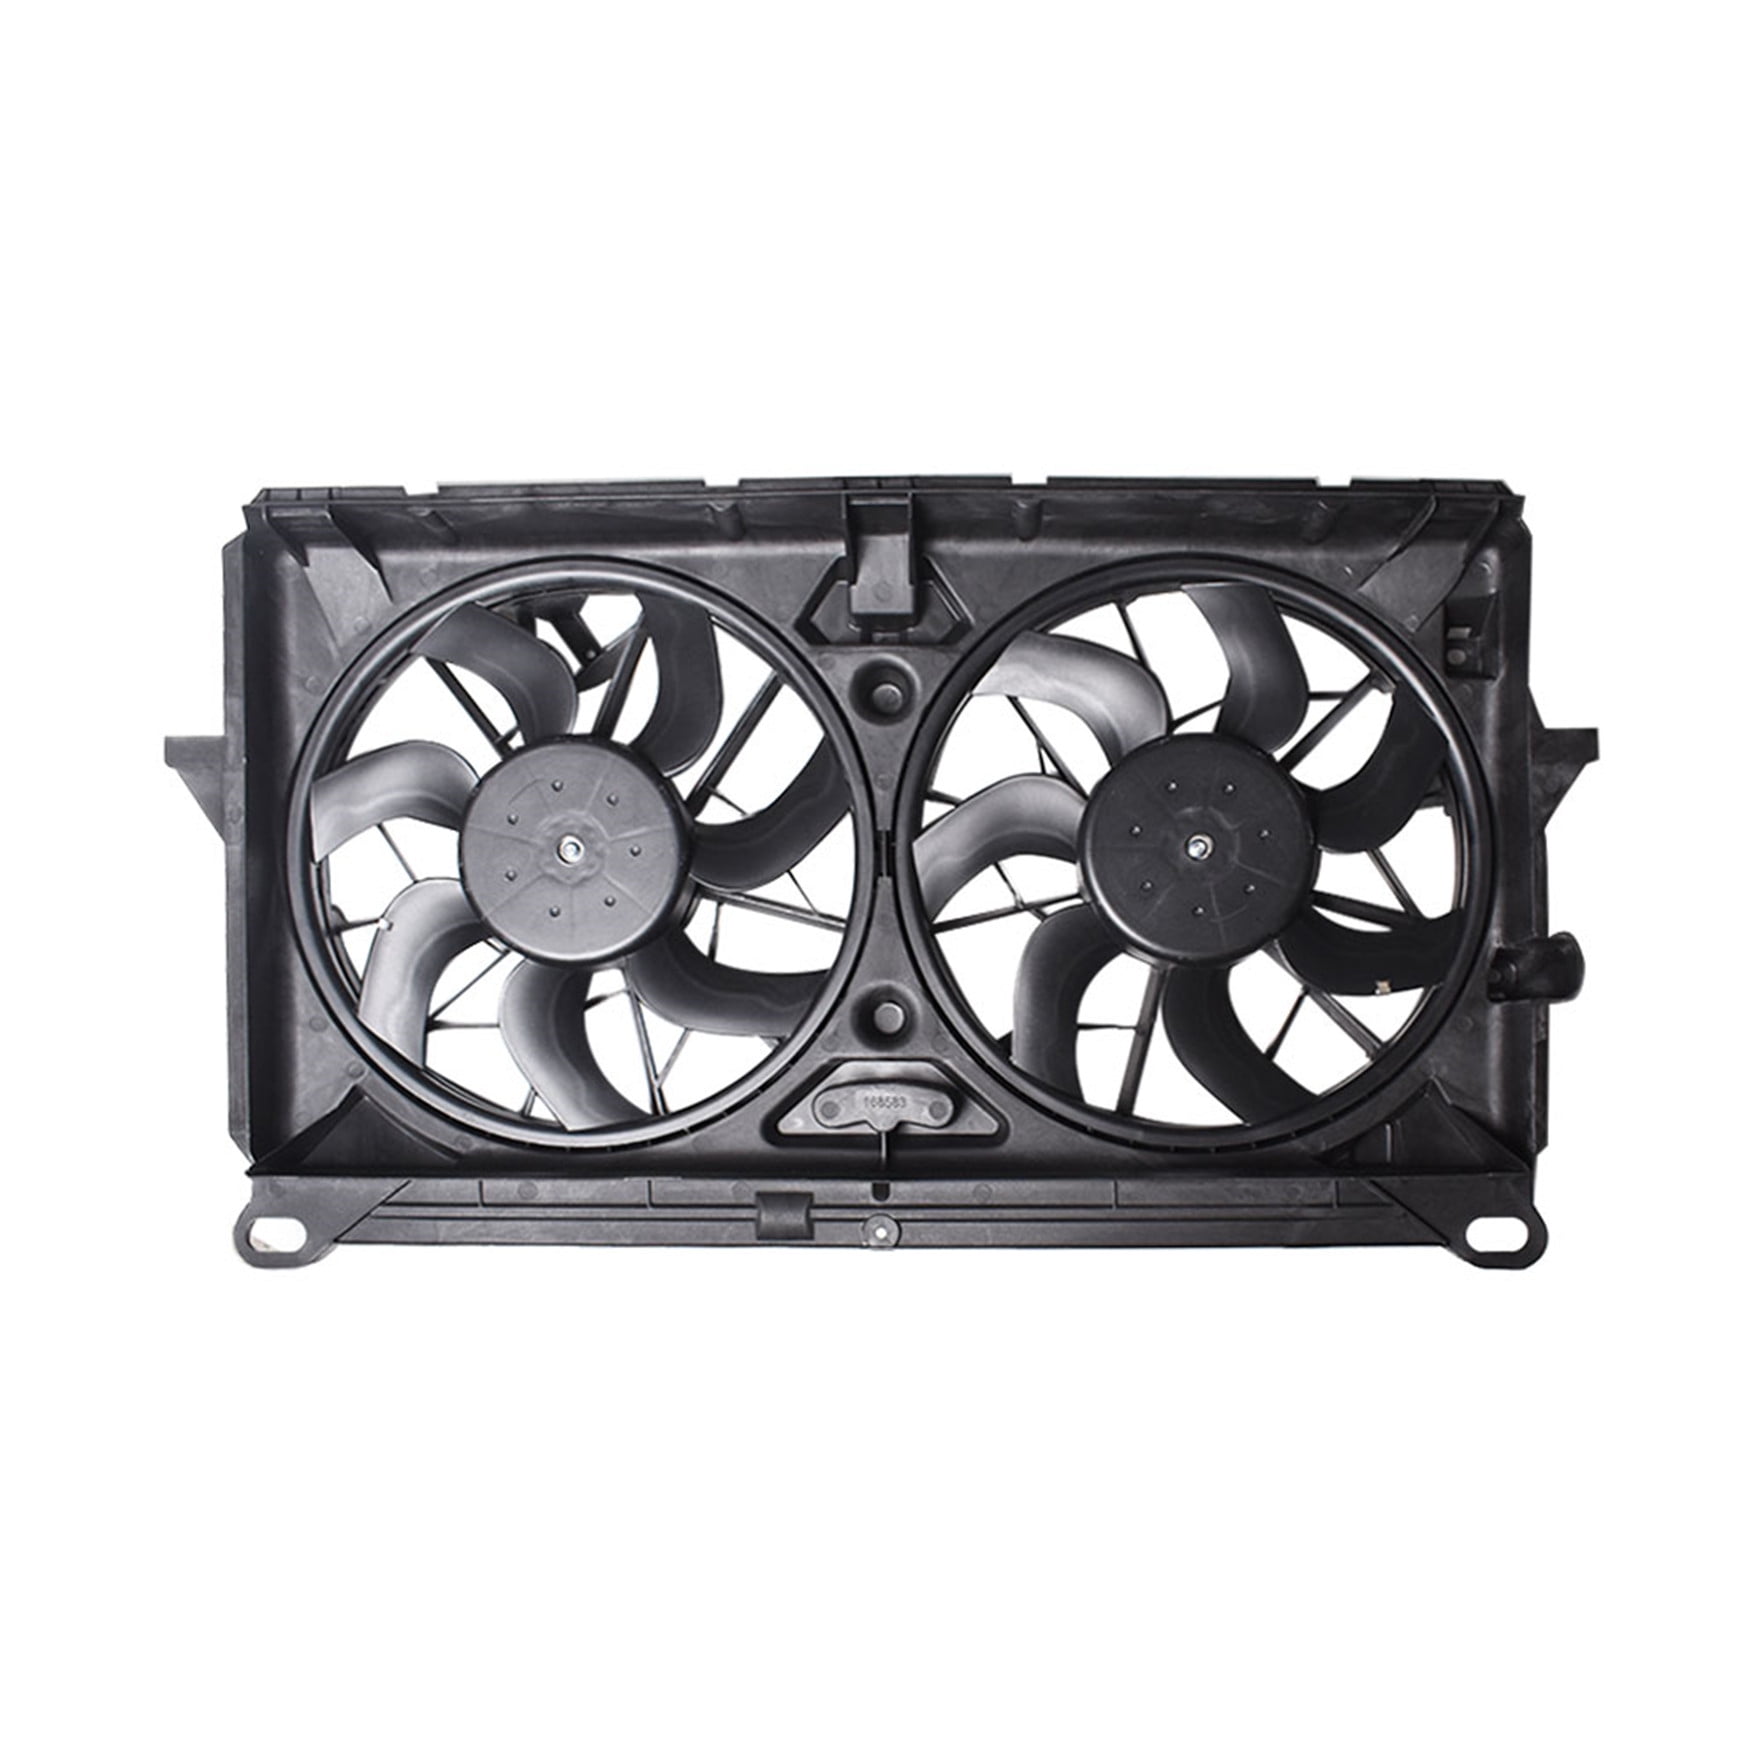 For Chevy Silverado 1500/2500/3500 HD/Classic A/C Cooling Fan Assembly 2005 2006 2007 w/Electric Cooling For GM3115212 89024933 